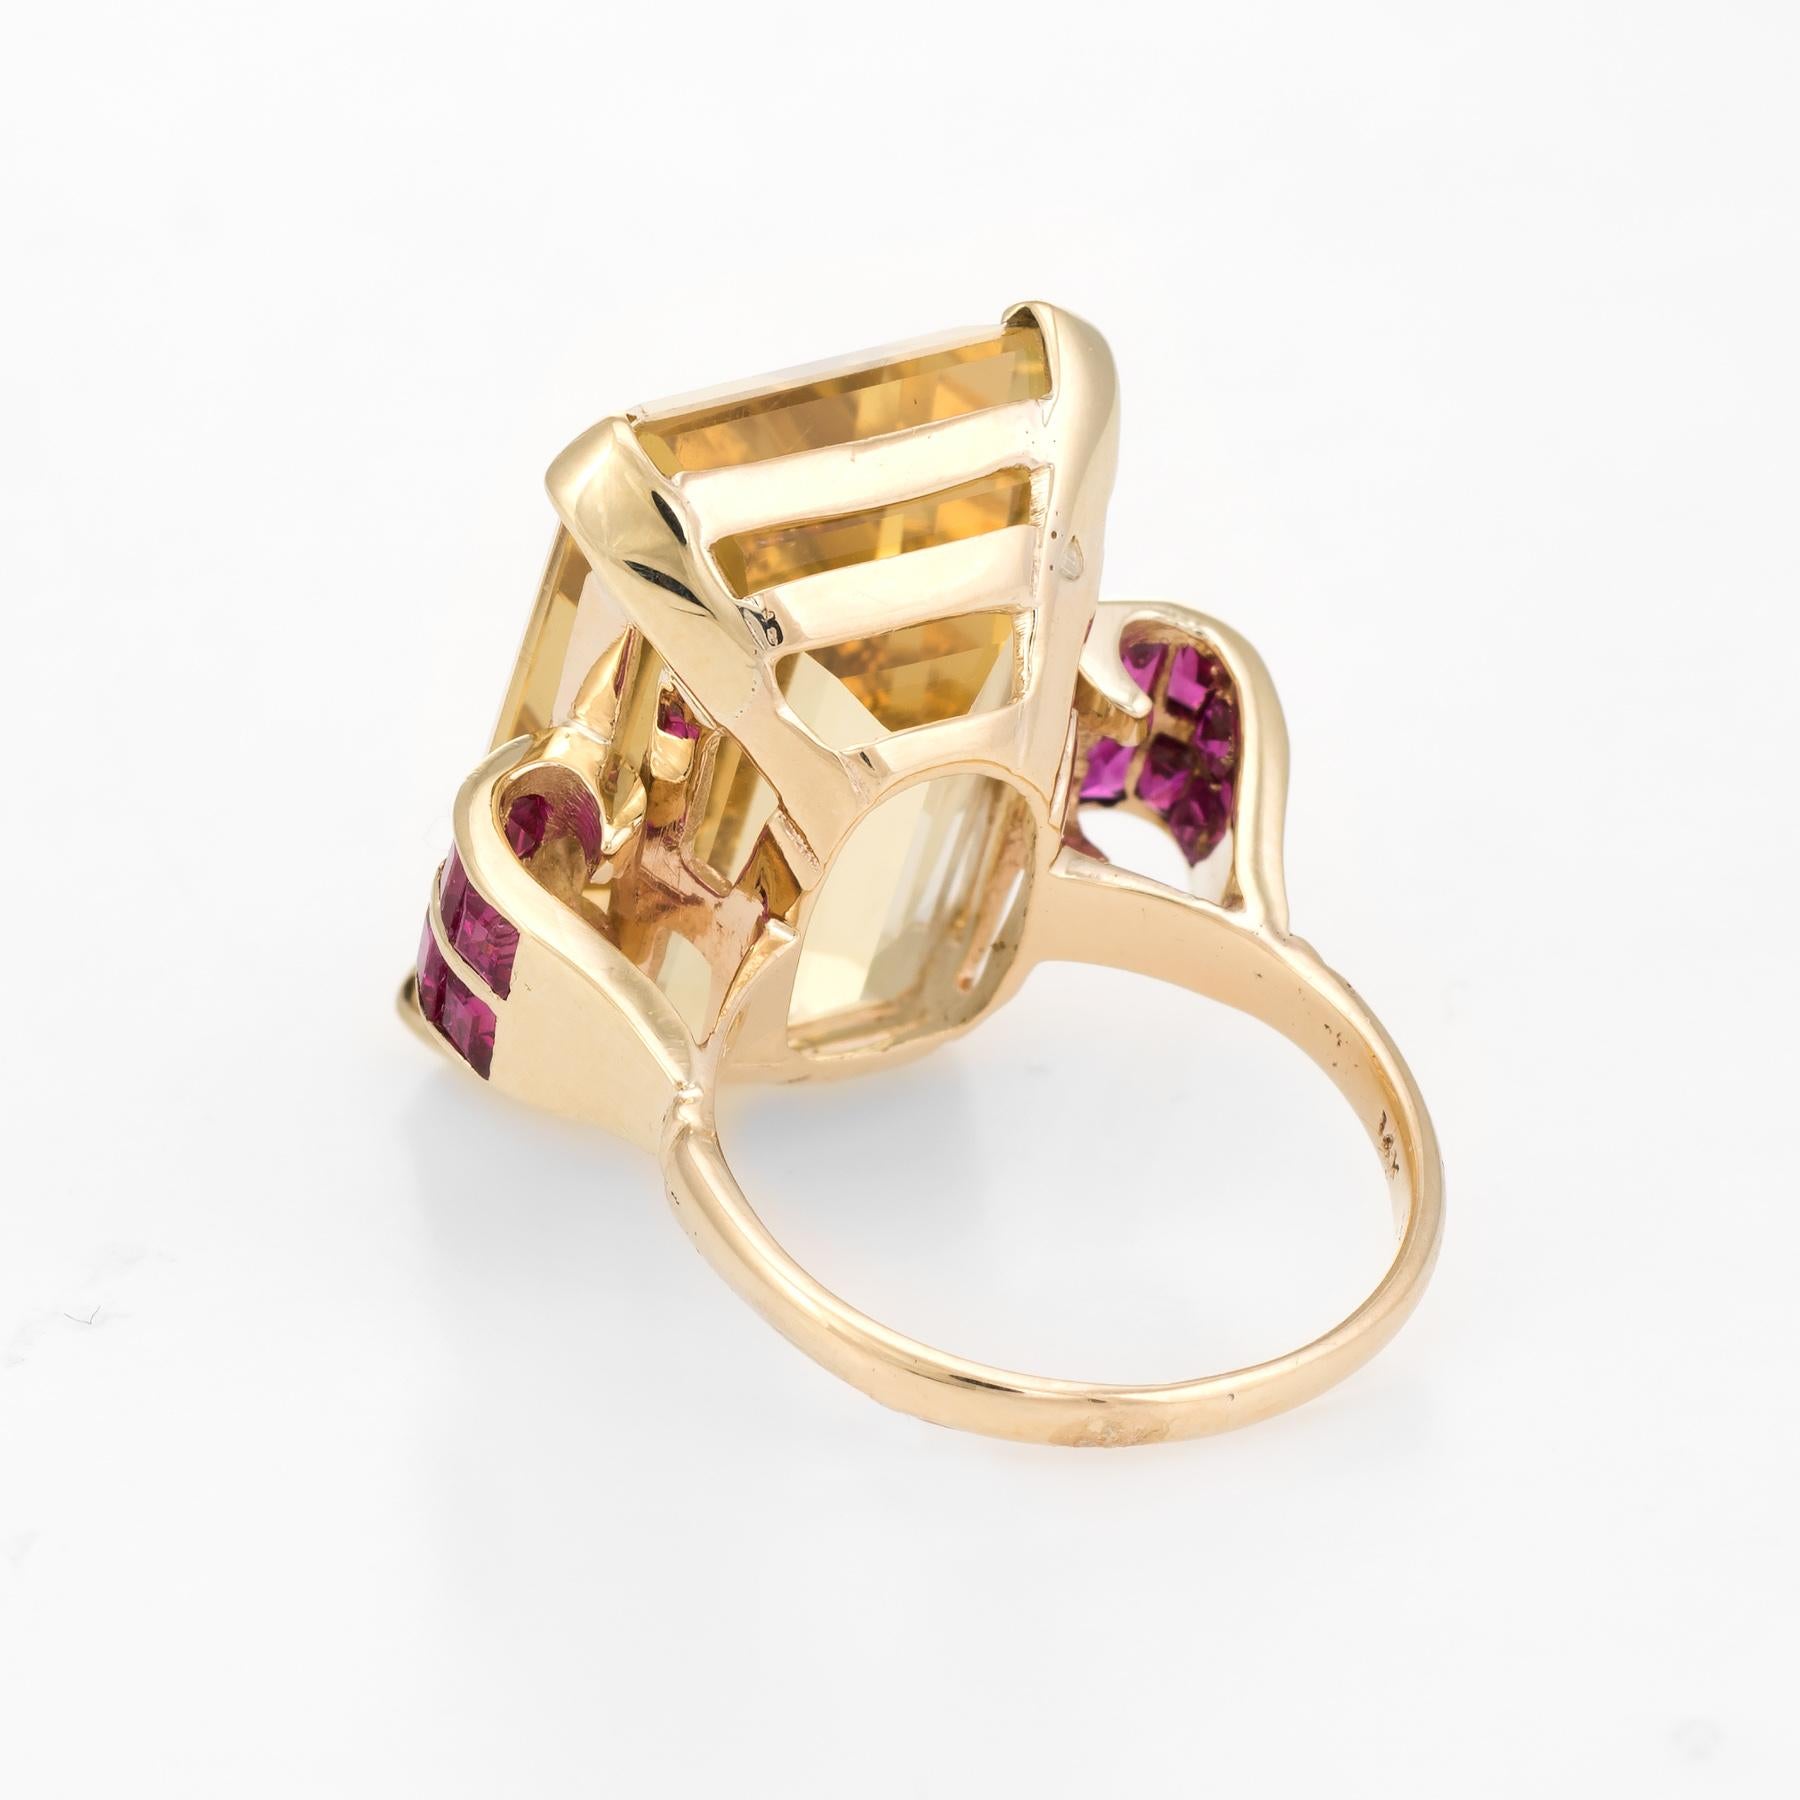 Emerald Cut Citrine Ruby Cocktail Ring Vintage 14 Karat Gold Large Statement Ring Jewelry